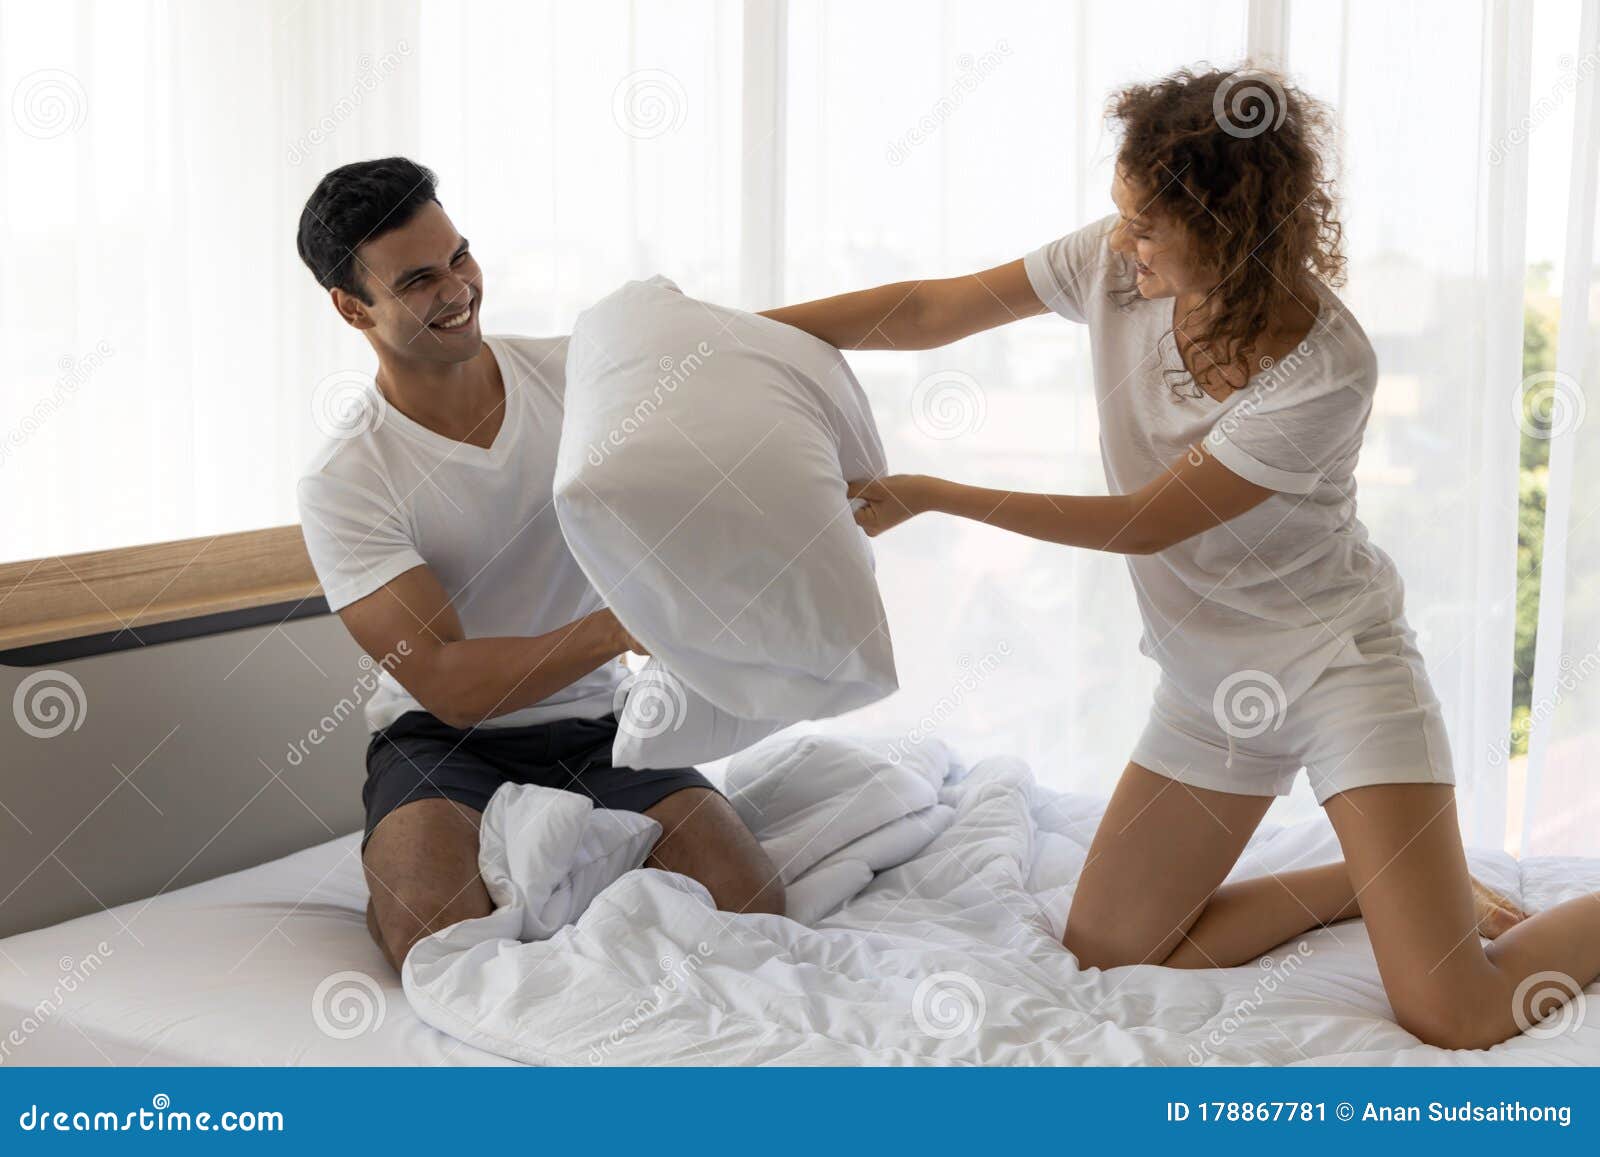 Happy Young Couple Having Fun With Pillow Fight On The Bed In Bedroom